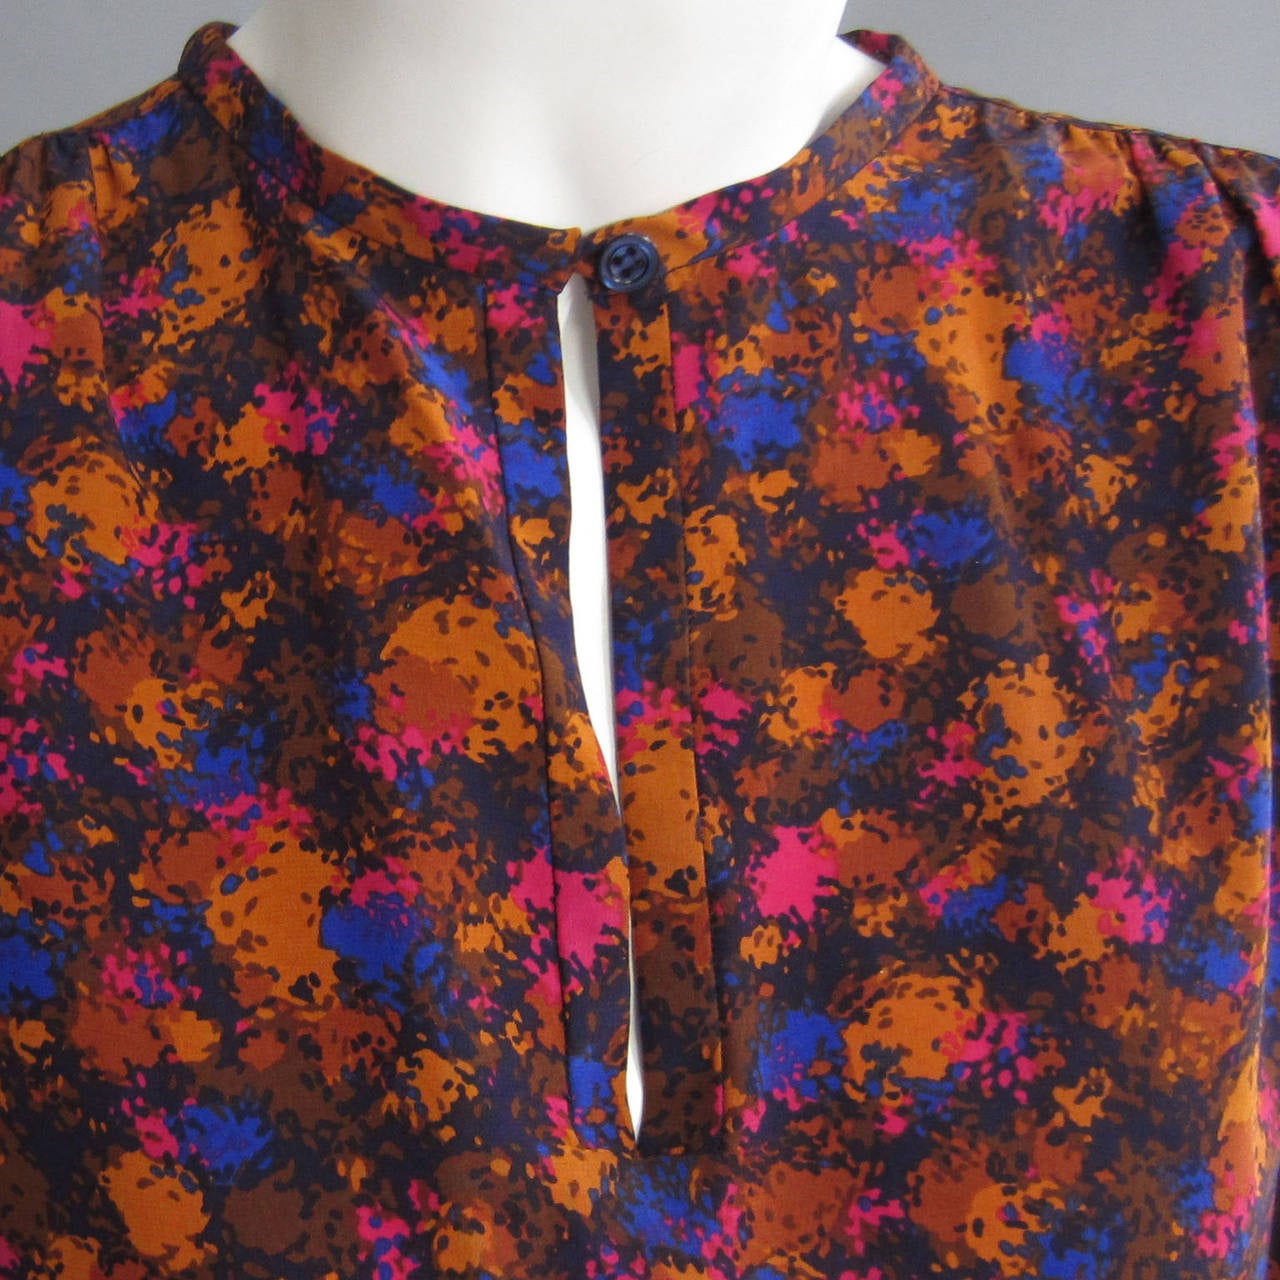 The gorgeous print silk of this YSL blouse features rich colors, splashed together creating an abstract, paintbrush effect. The front features a keyhole at the center of the neck. It is secured closed by a single button, or could be left open. There